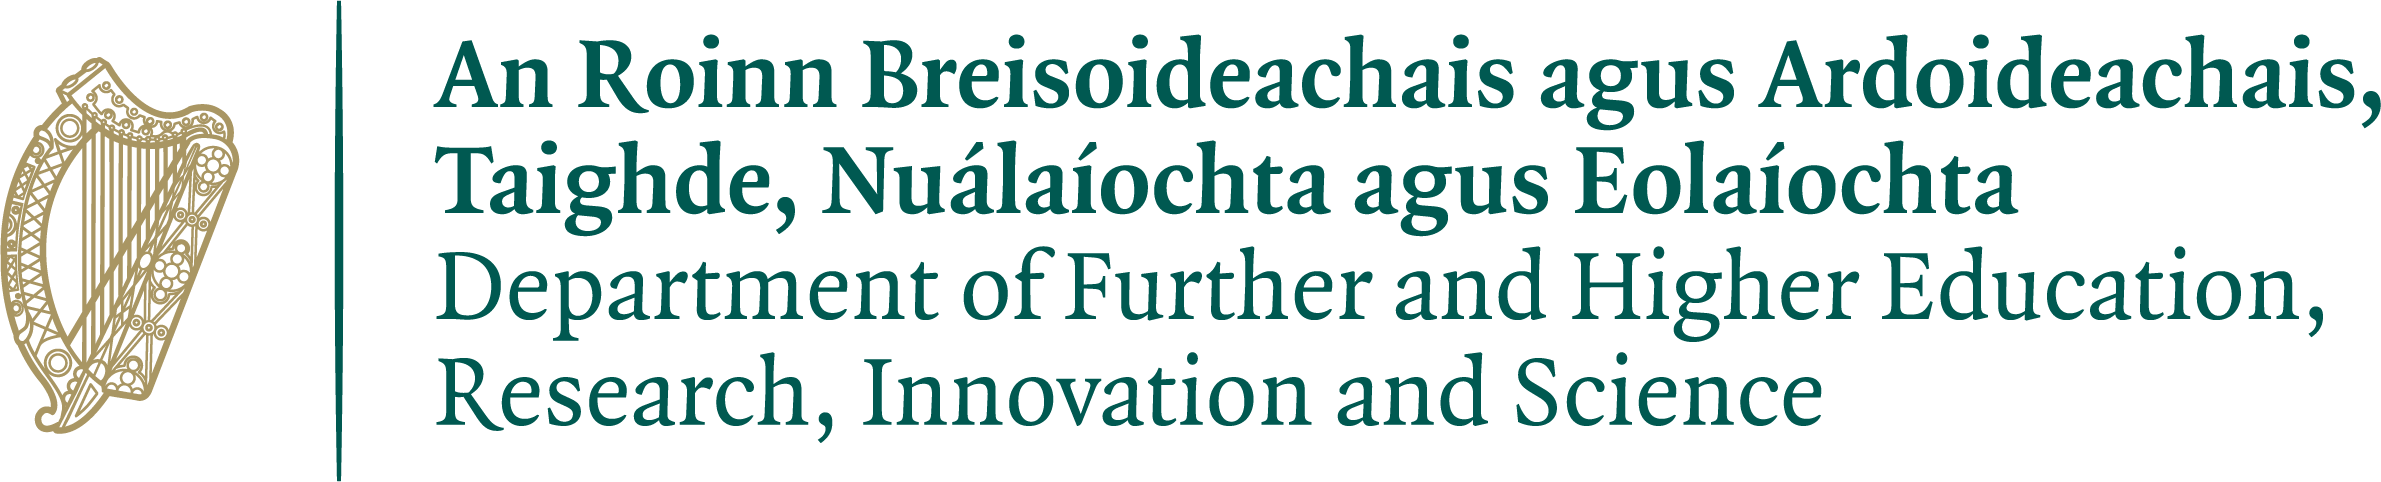 Irish Department of Further and Higher Education, Research, Innovation and Science logo